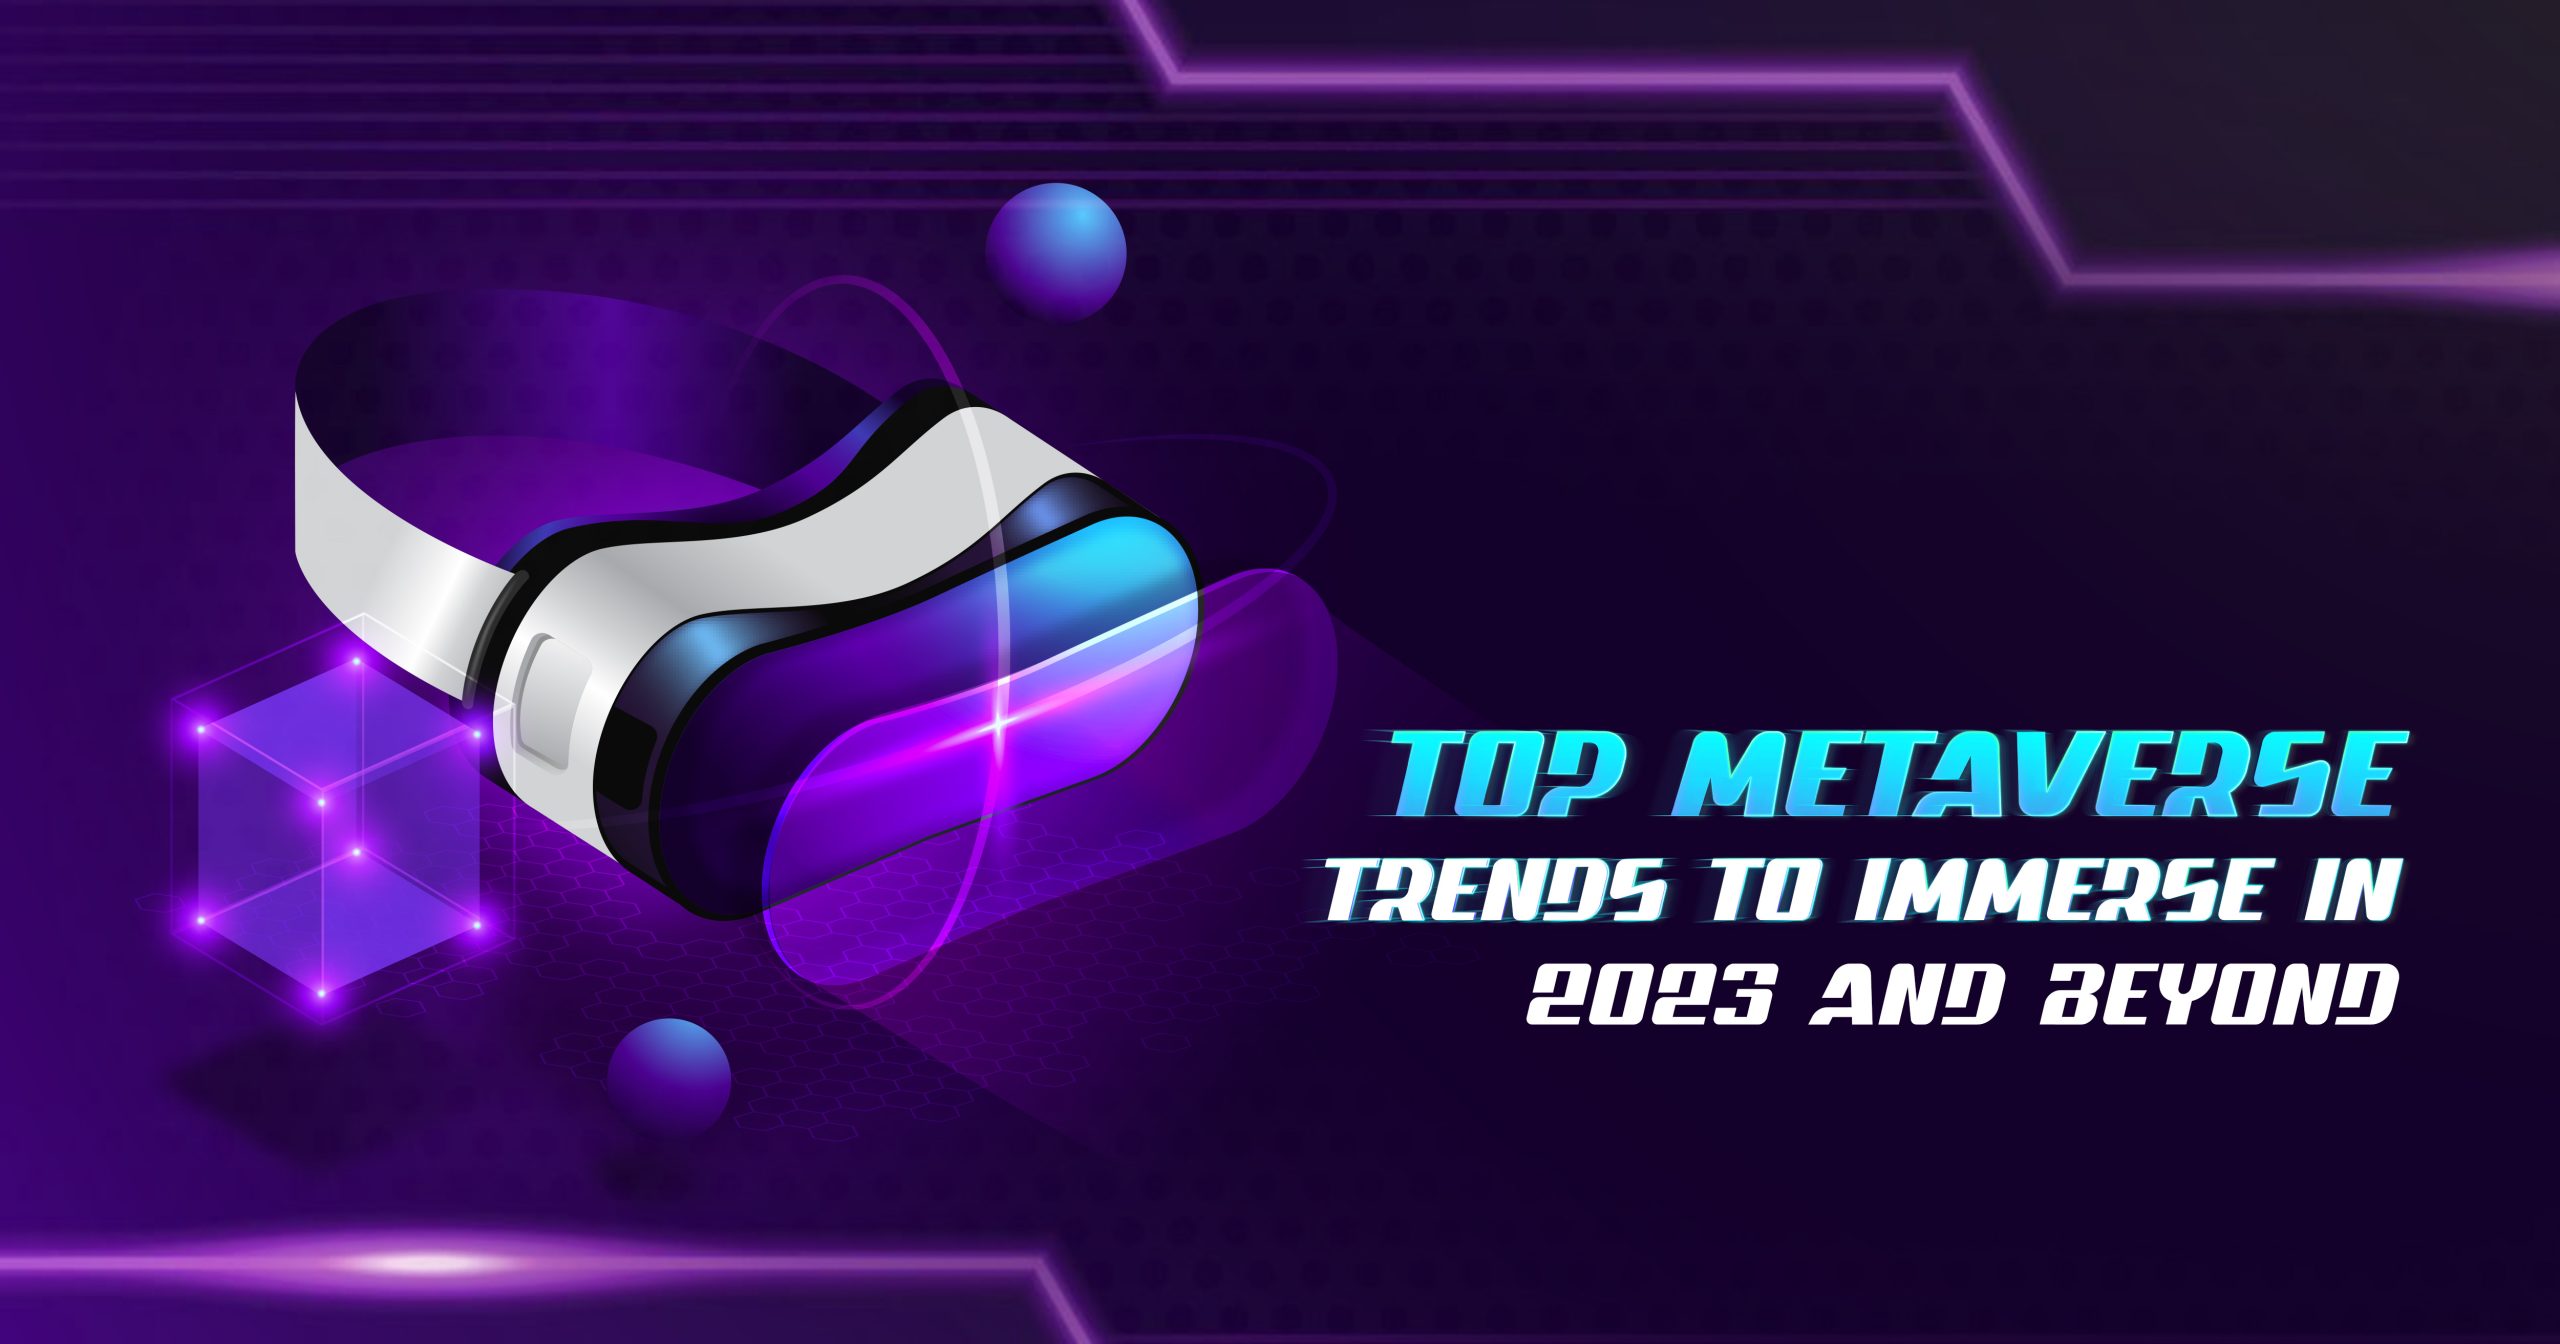 Top Metaverse Trends To Immerse In 2023 And Beyond